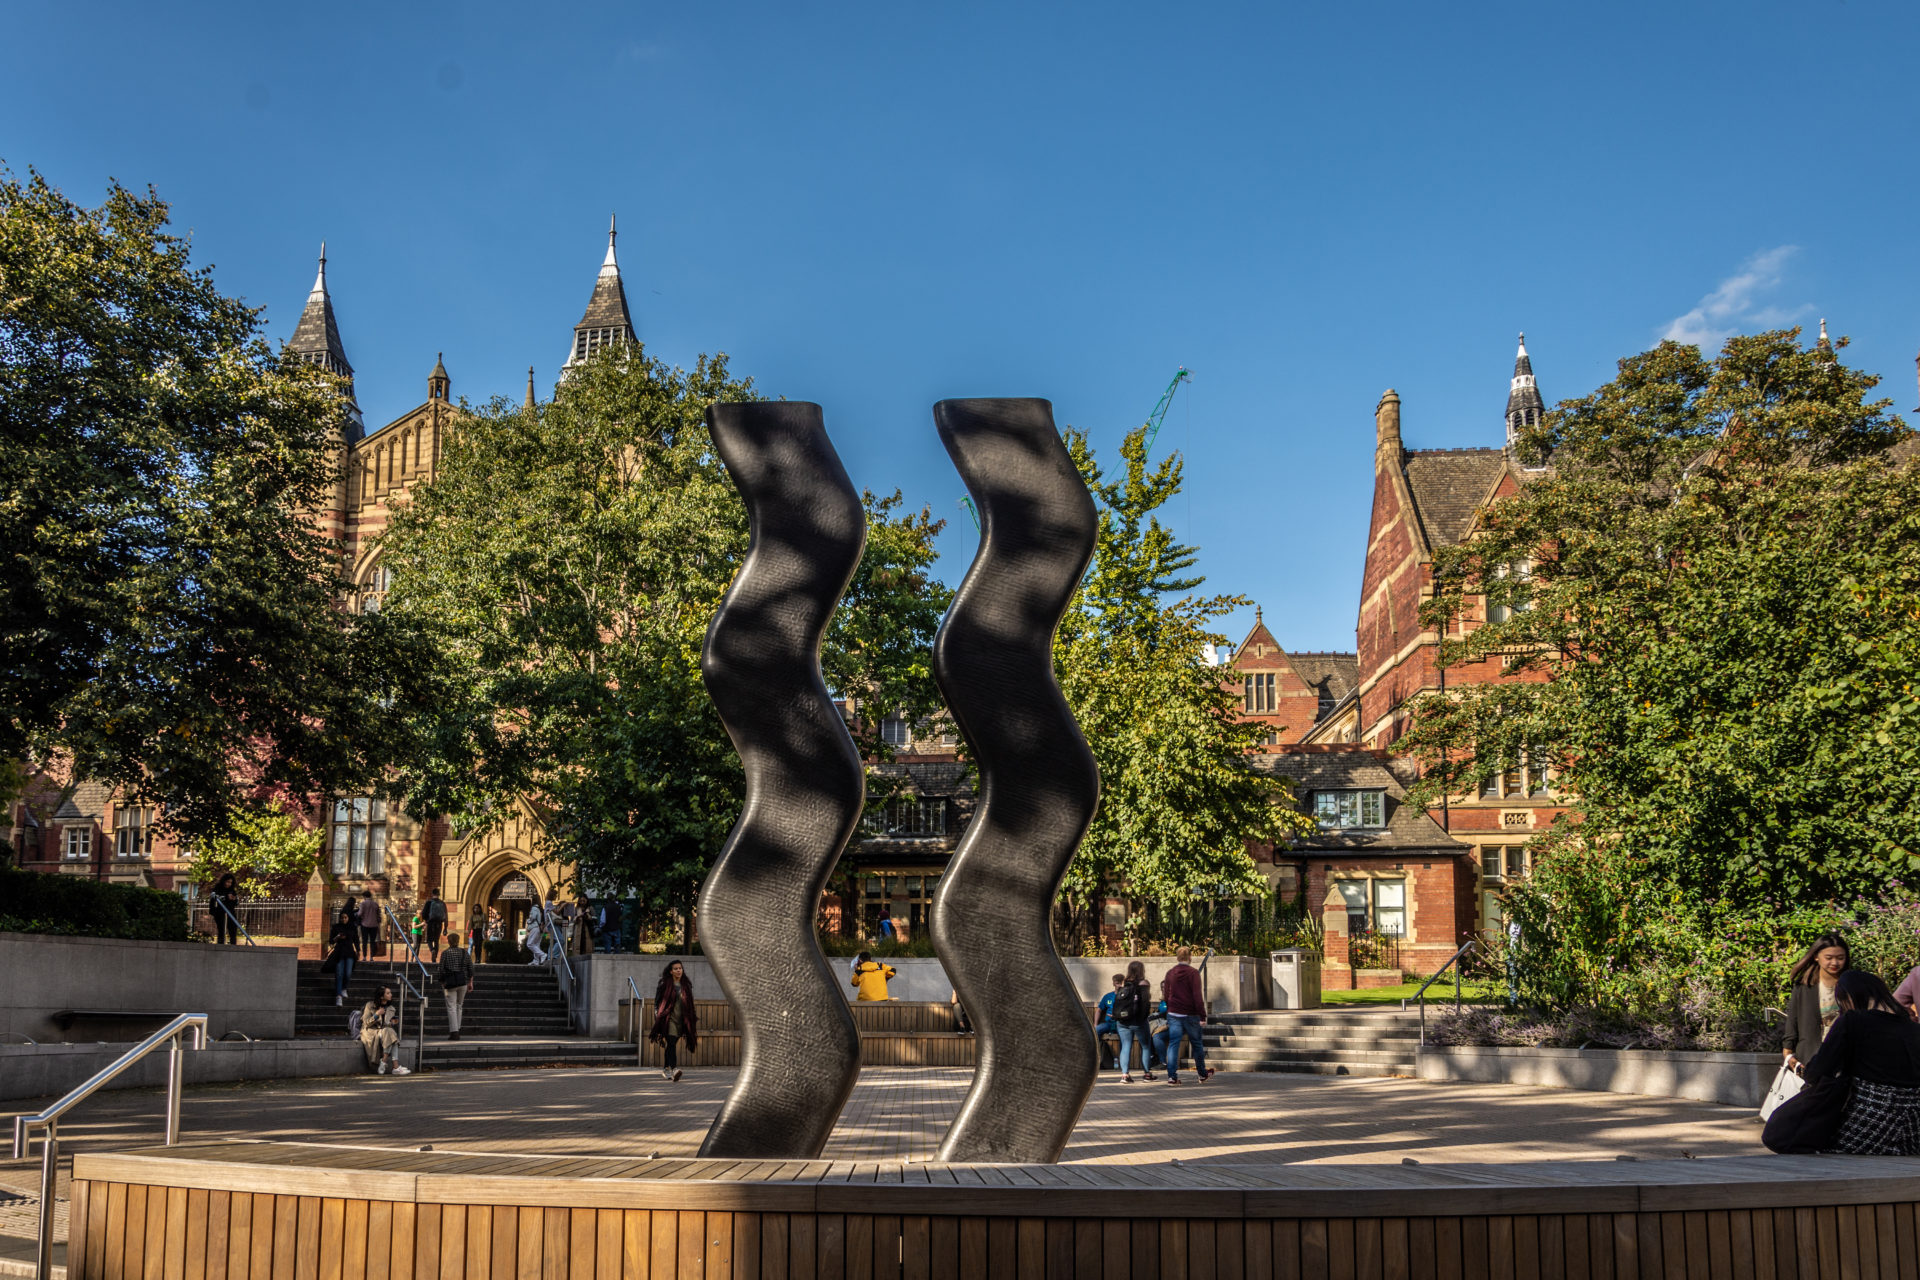 Photo on campus showing the wiggly bacon statue